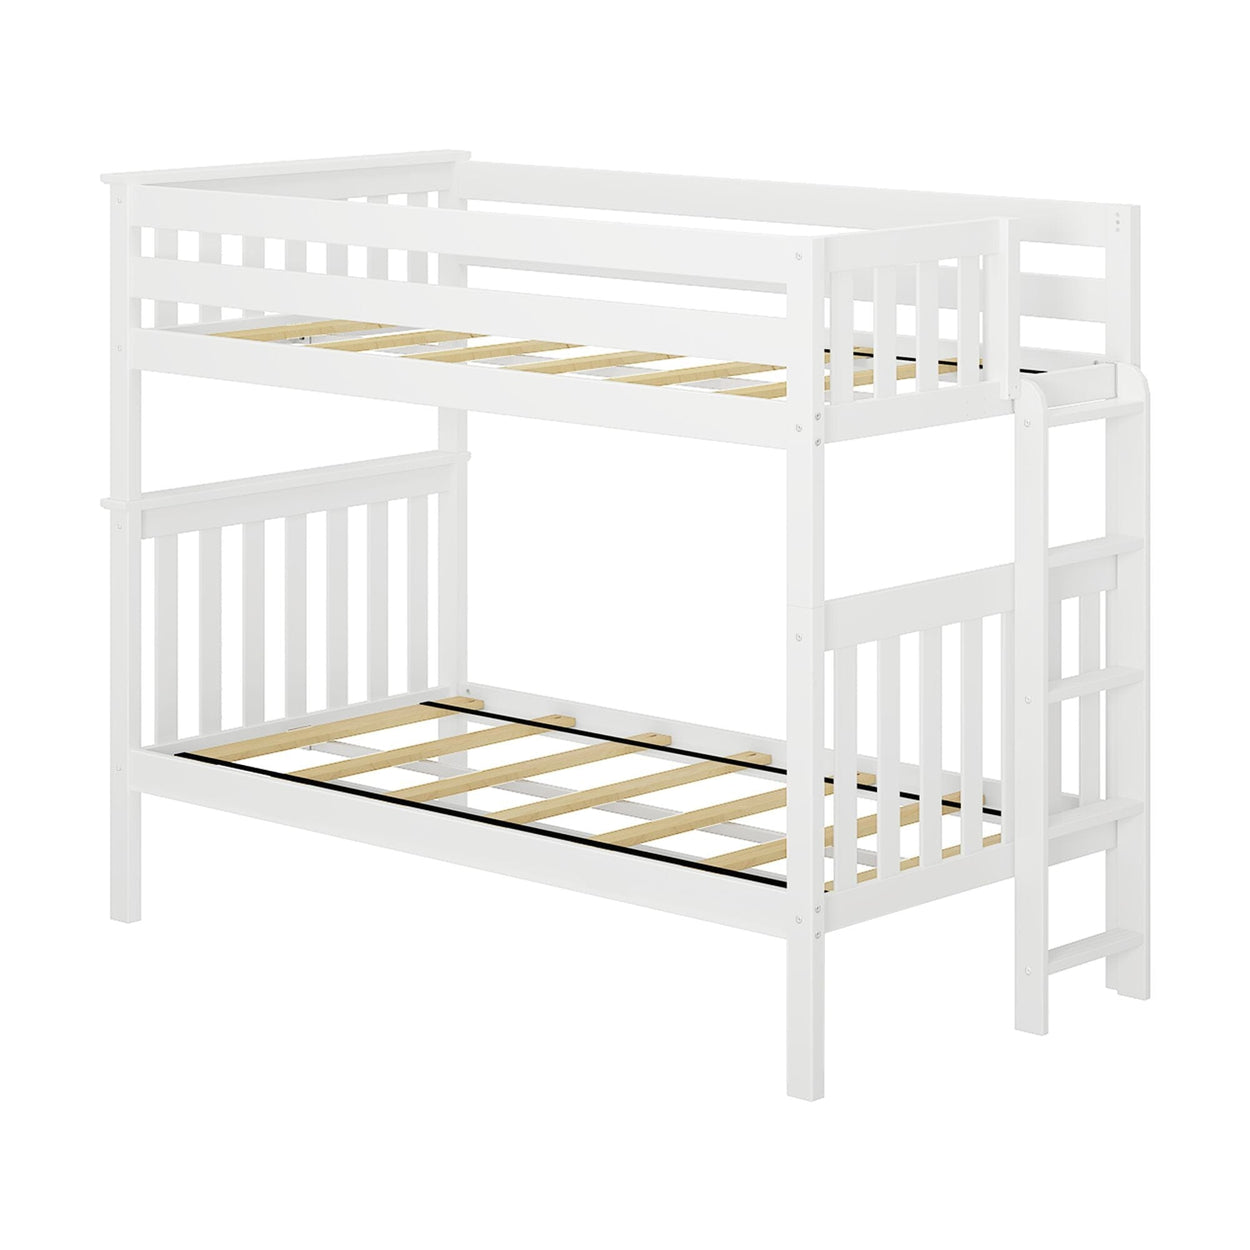 185305-002 : Bunk Beds Twin over Twin Bunk Bed with Ladder on End, White